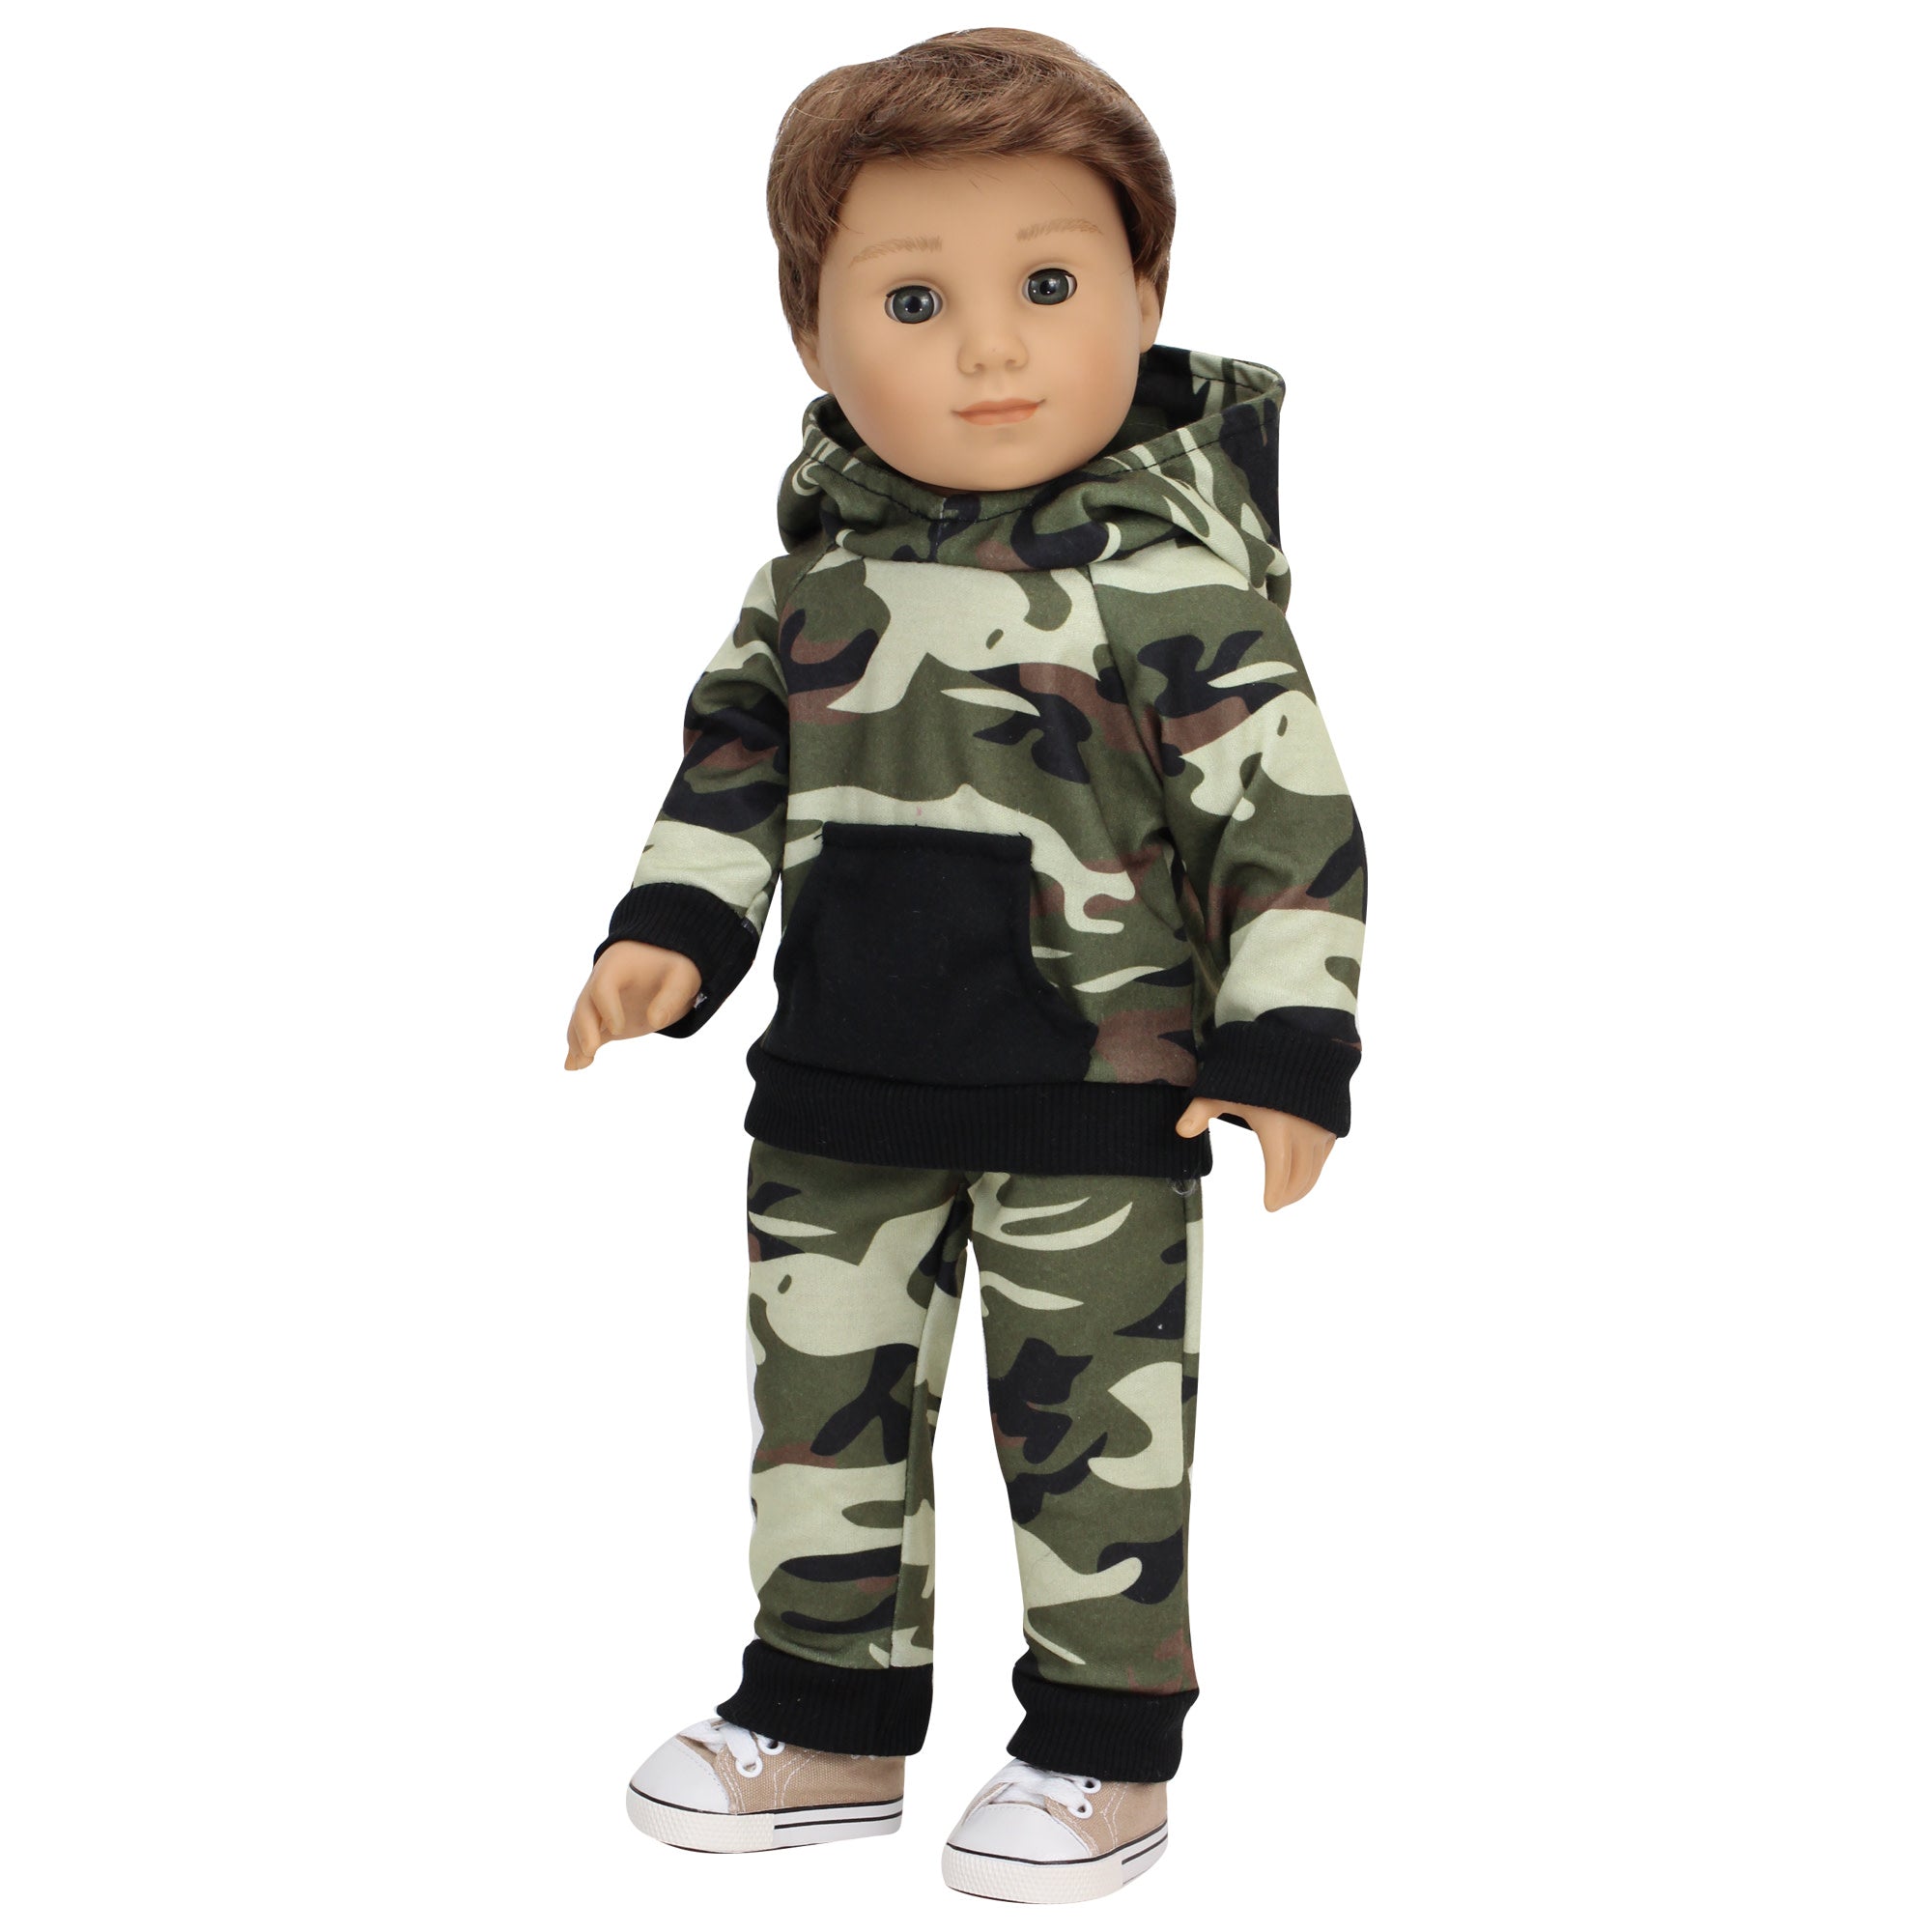 Sophia’s Mix & Match Gender-Neutral Camouflage Sweatsuit Complete Outfit Set for 18” Dolls, Green